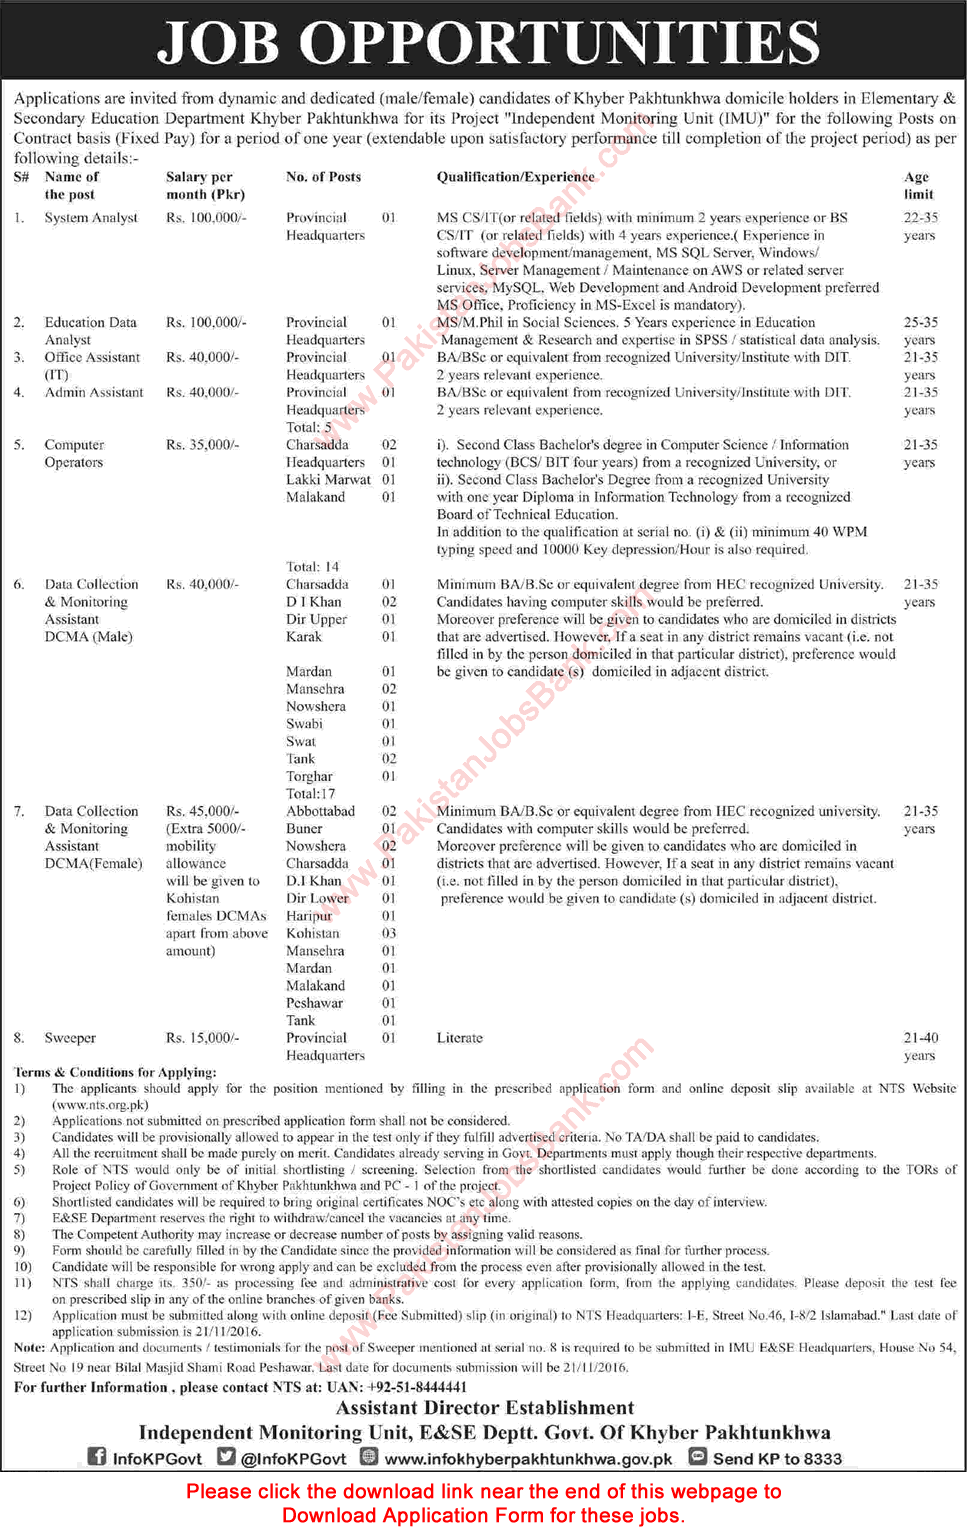 Elementary and Secondary Education Department KPK Jobs November 2016 NTS Application Form Download Latest